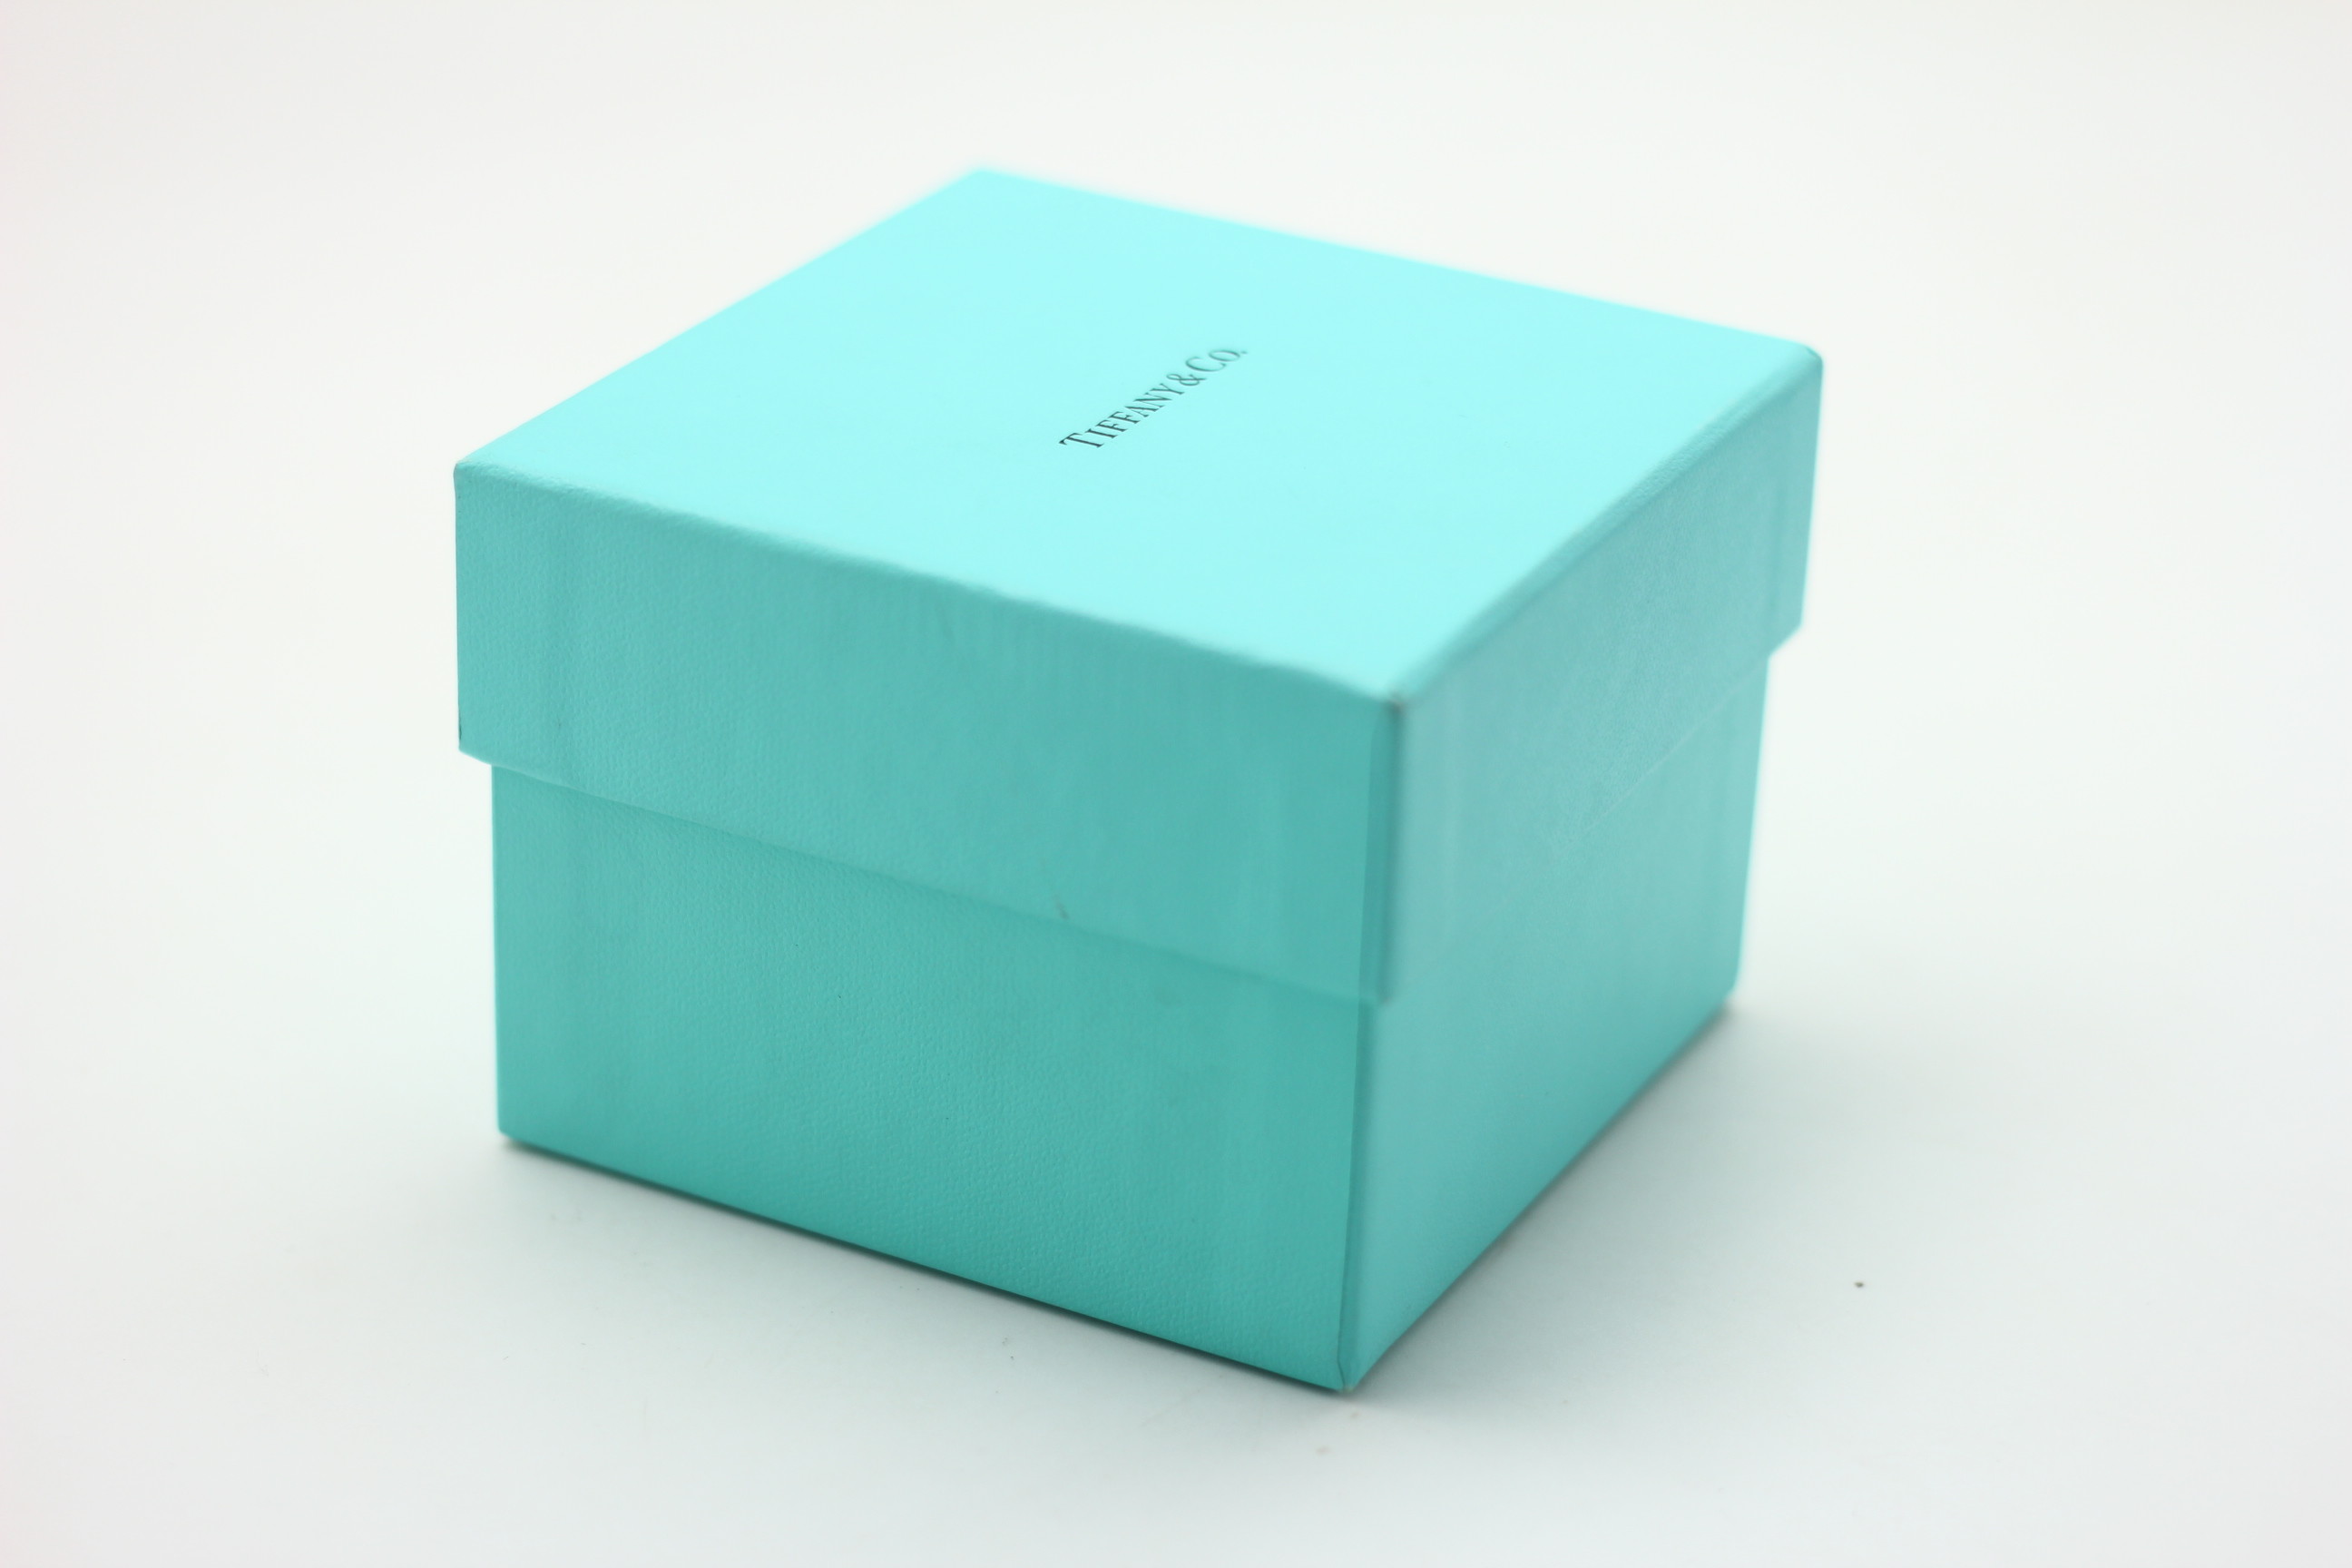 Latest company case about Jewelry Packaging box - 2 pieces rigid box